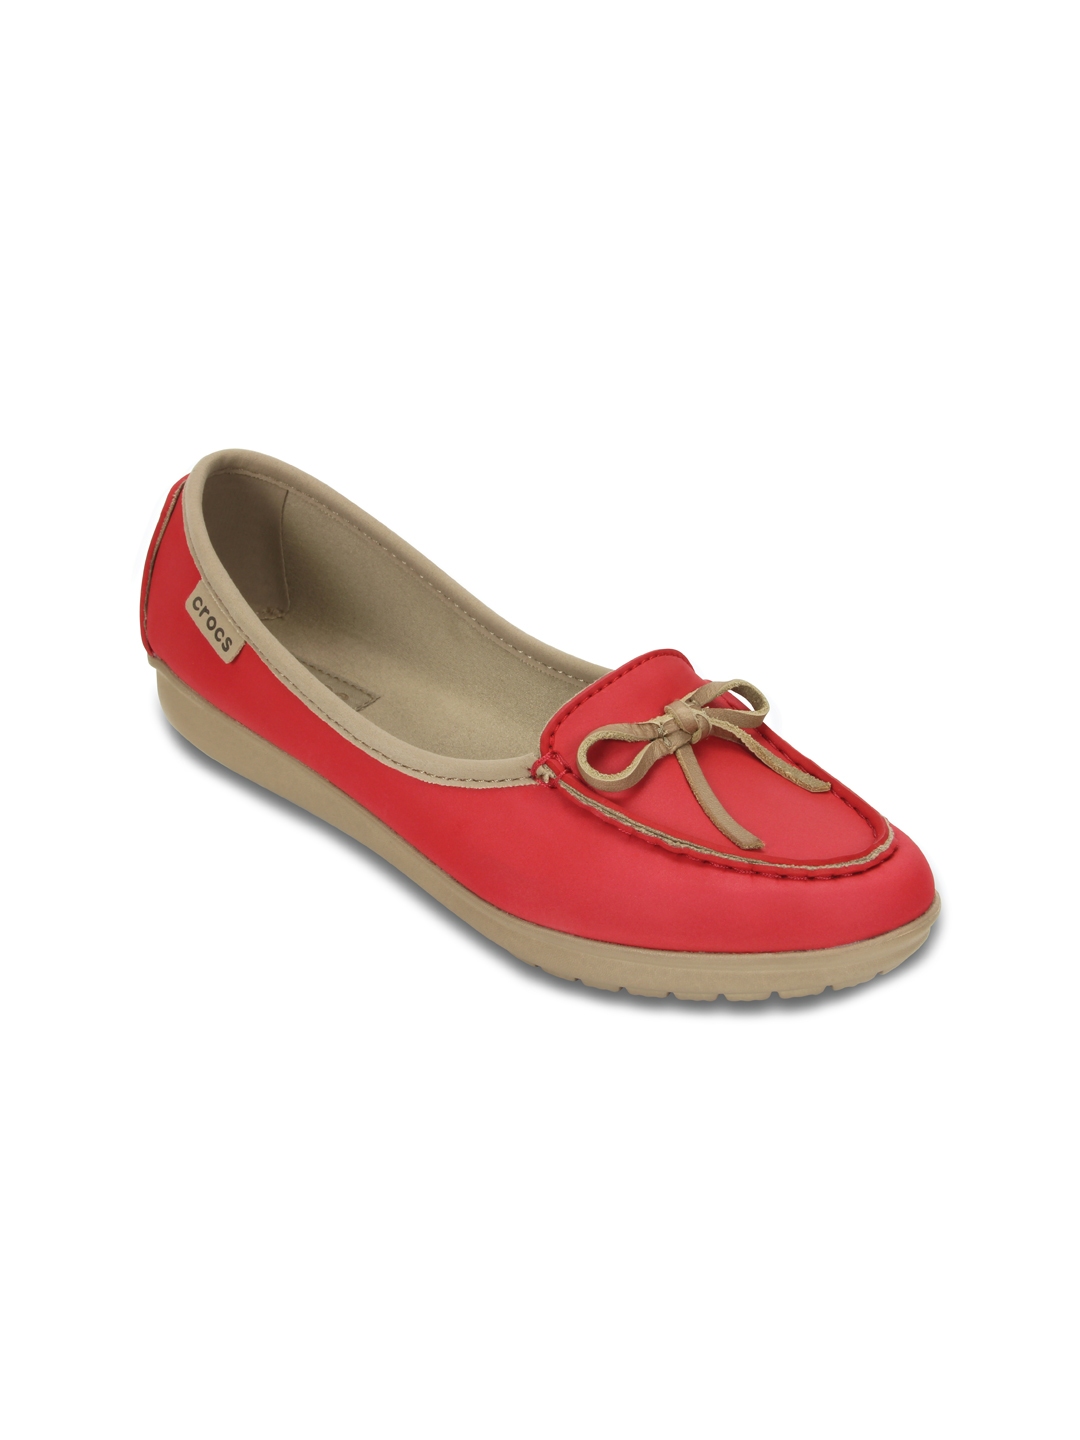 Buy Crocs Wrap Colorlite Women Red Loafers - Casual Shoes for Women ...